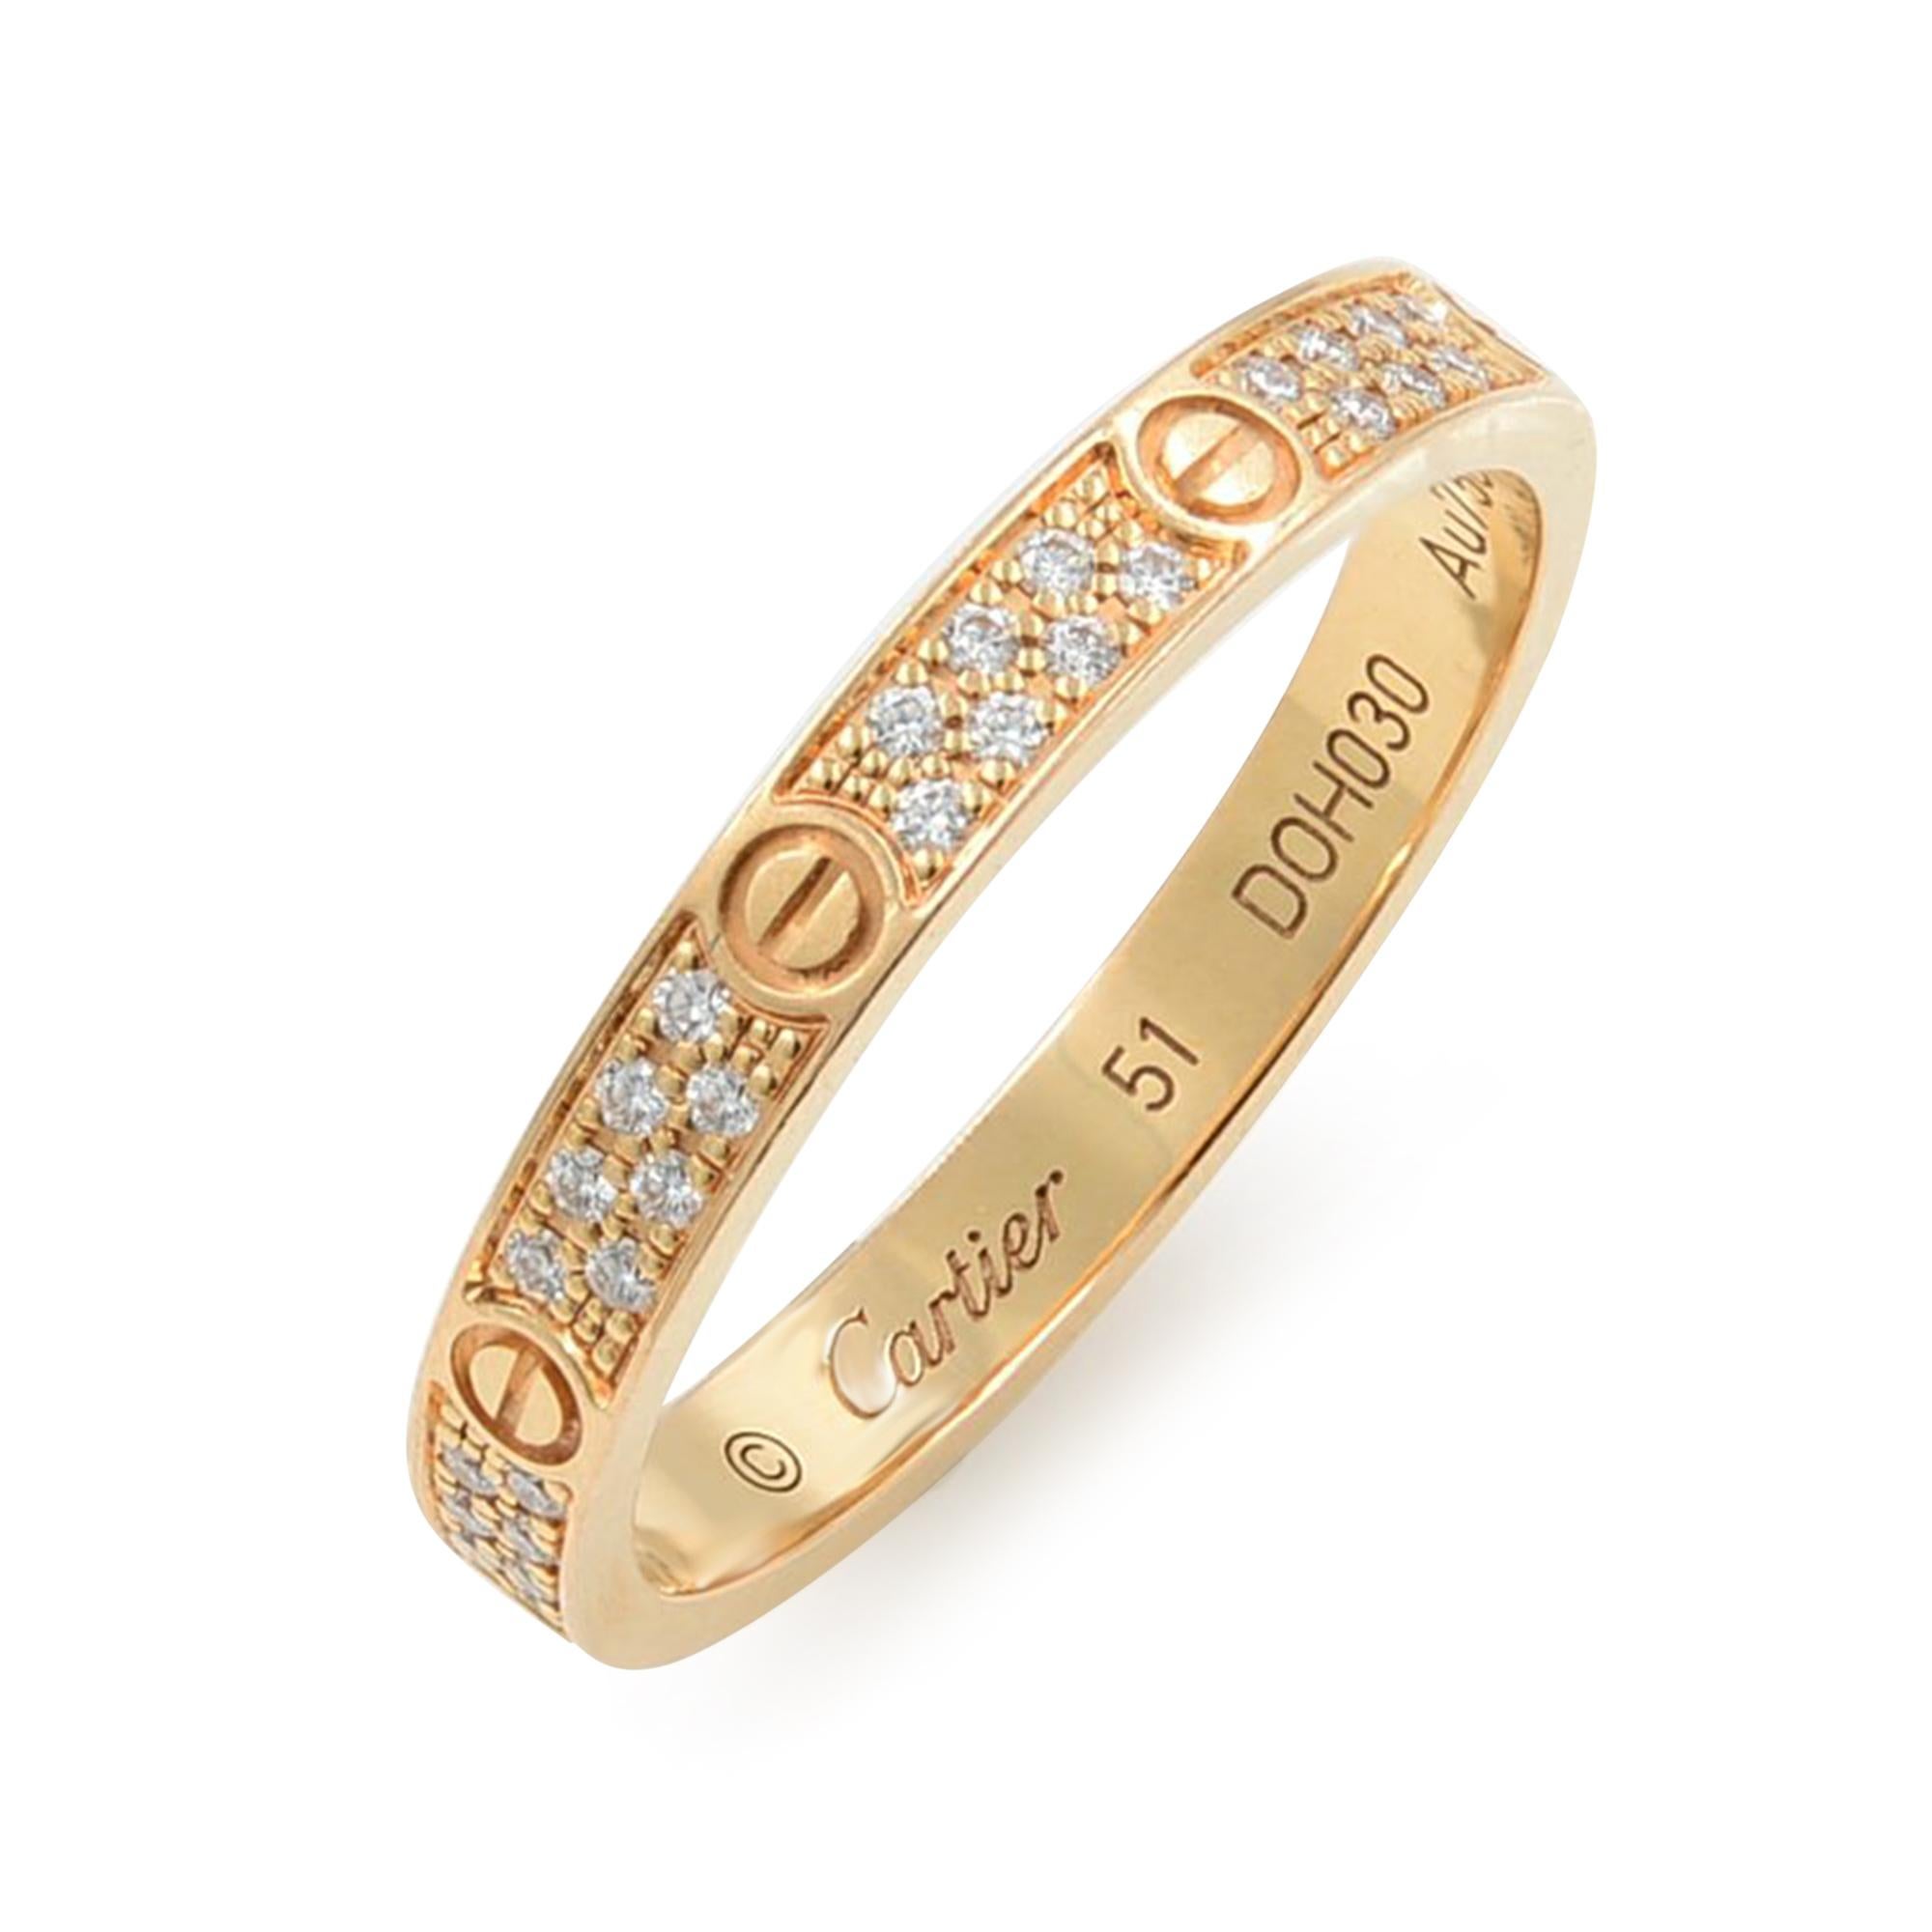 Cartier Love 18k Rose Gold Pave Diamond Small Band Ring Size 5.75 
Brand: Cartier
Gender: Womens 
Condition: Very Good 
Metal: 18k Rose Gold
Stone: 0.19ct. Pave Diamonds 
With Box. 
FROM CARTIER:
Love ring, small model, 18K pink gold, set with 72